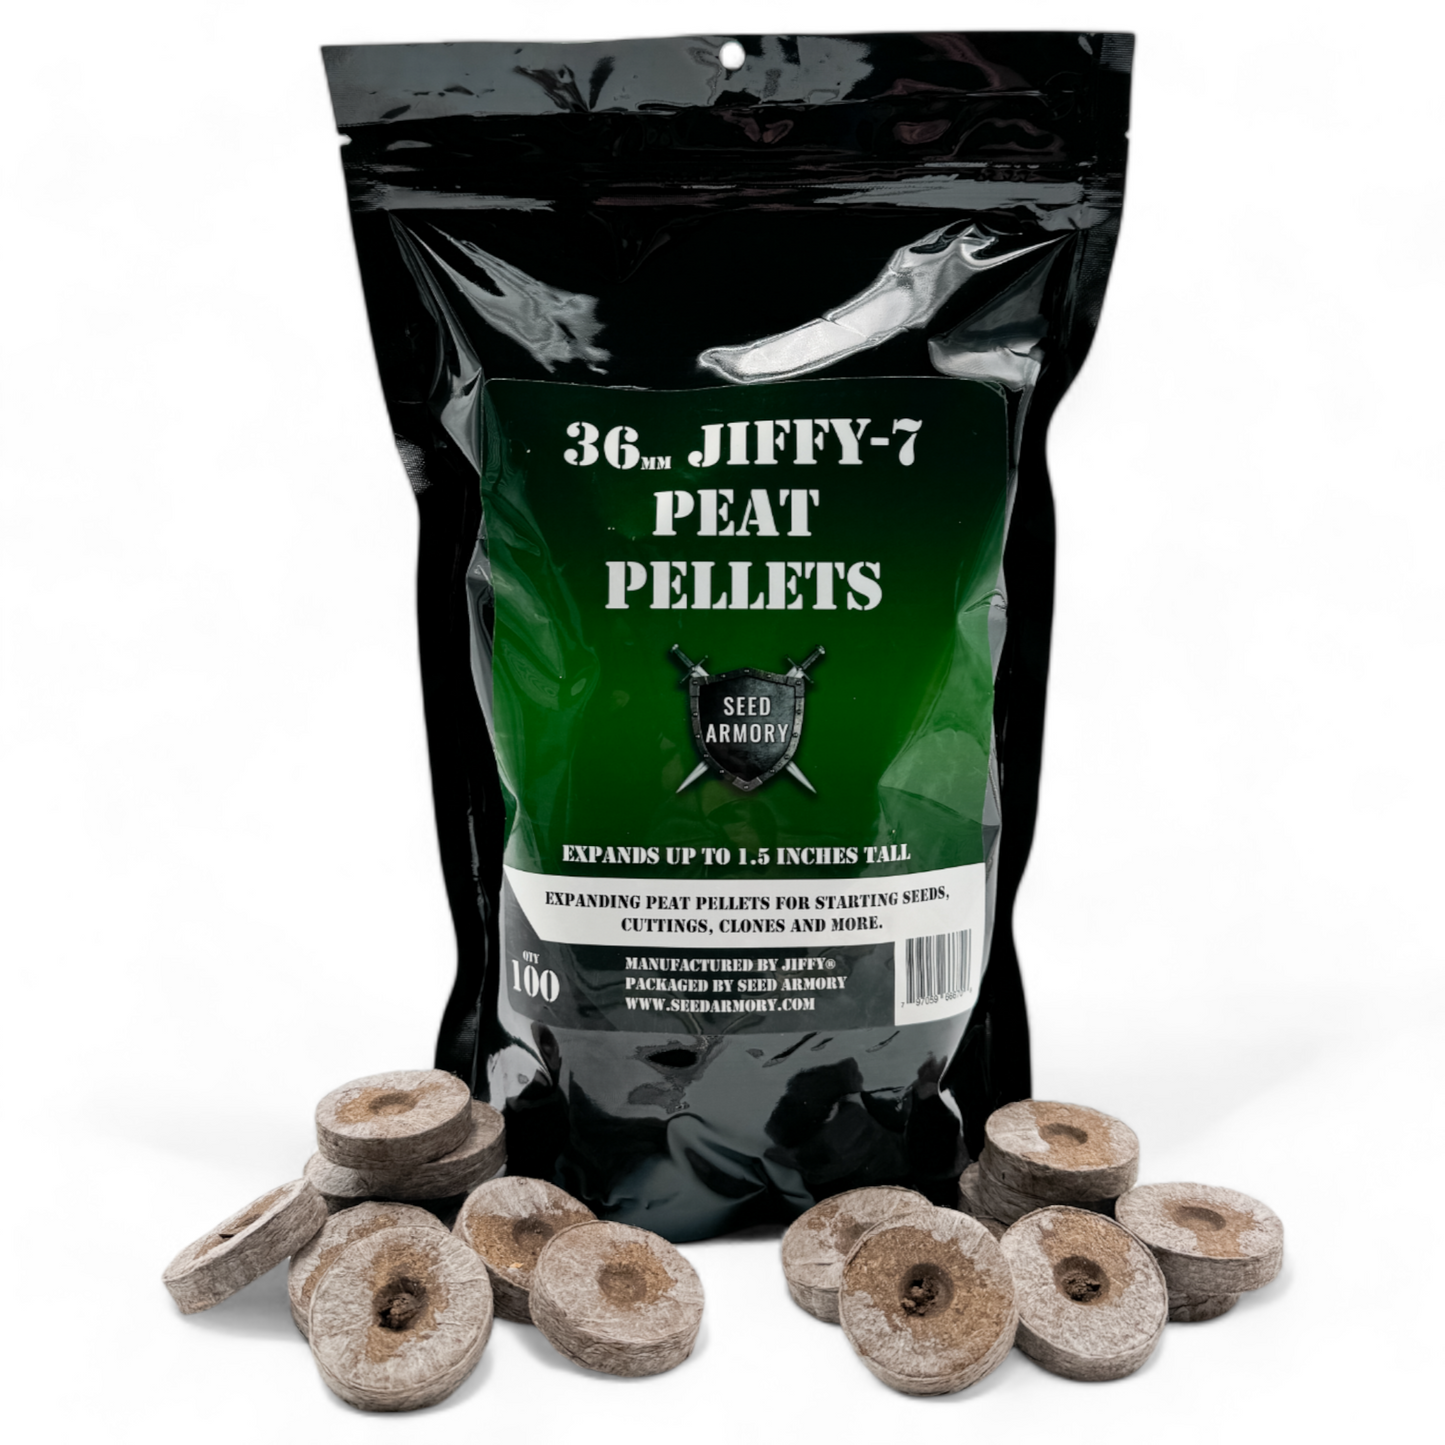 Green Thumb Power Pack Jiffy 7 seed starting pellets with pellet examples